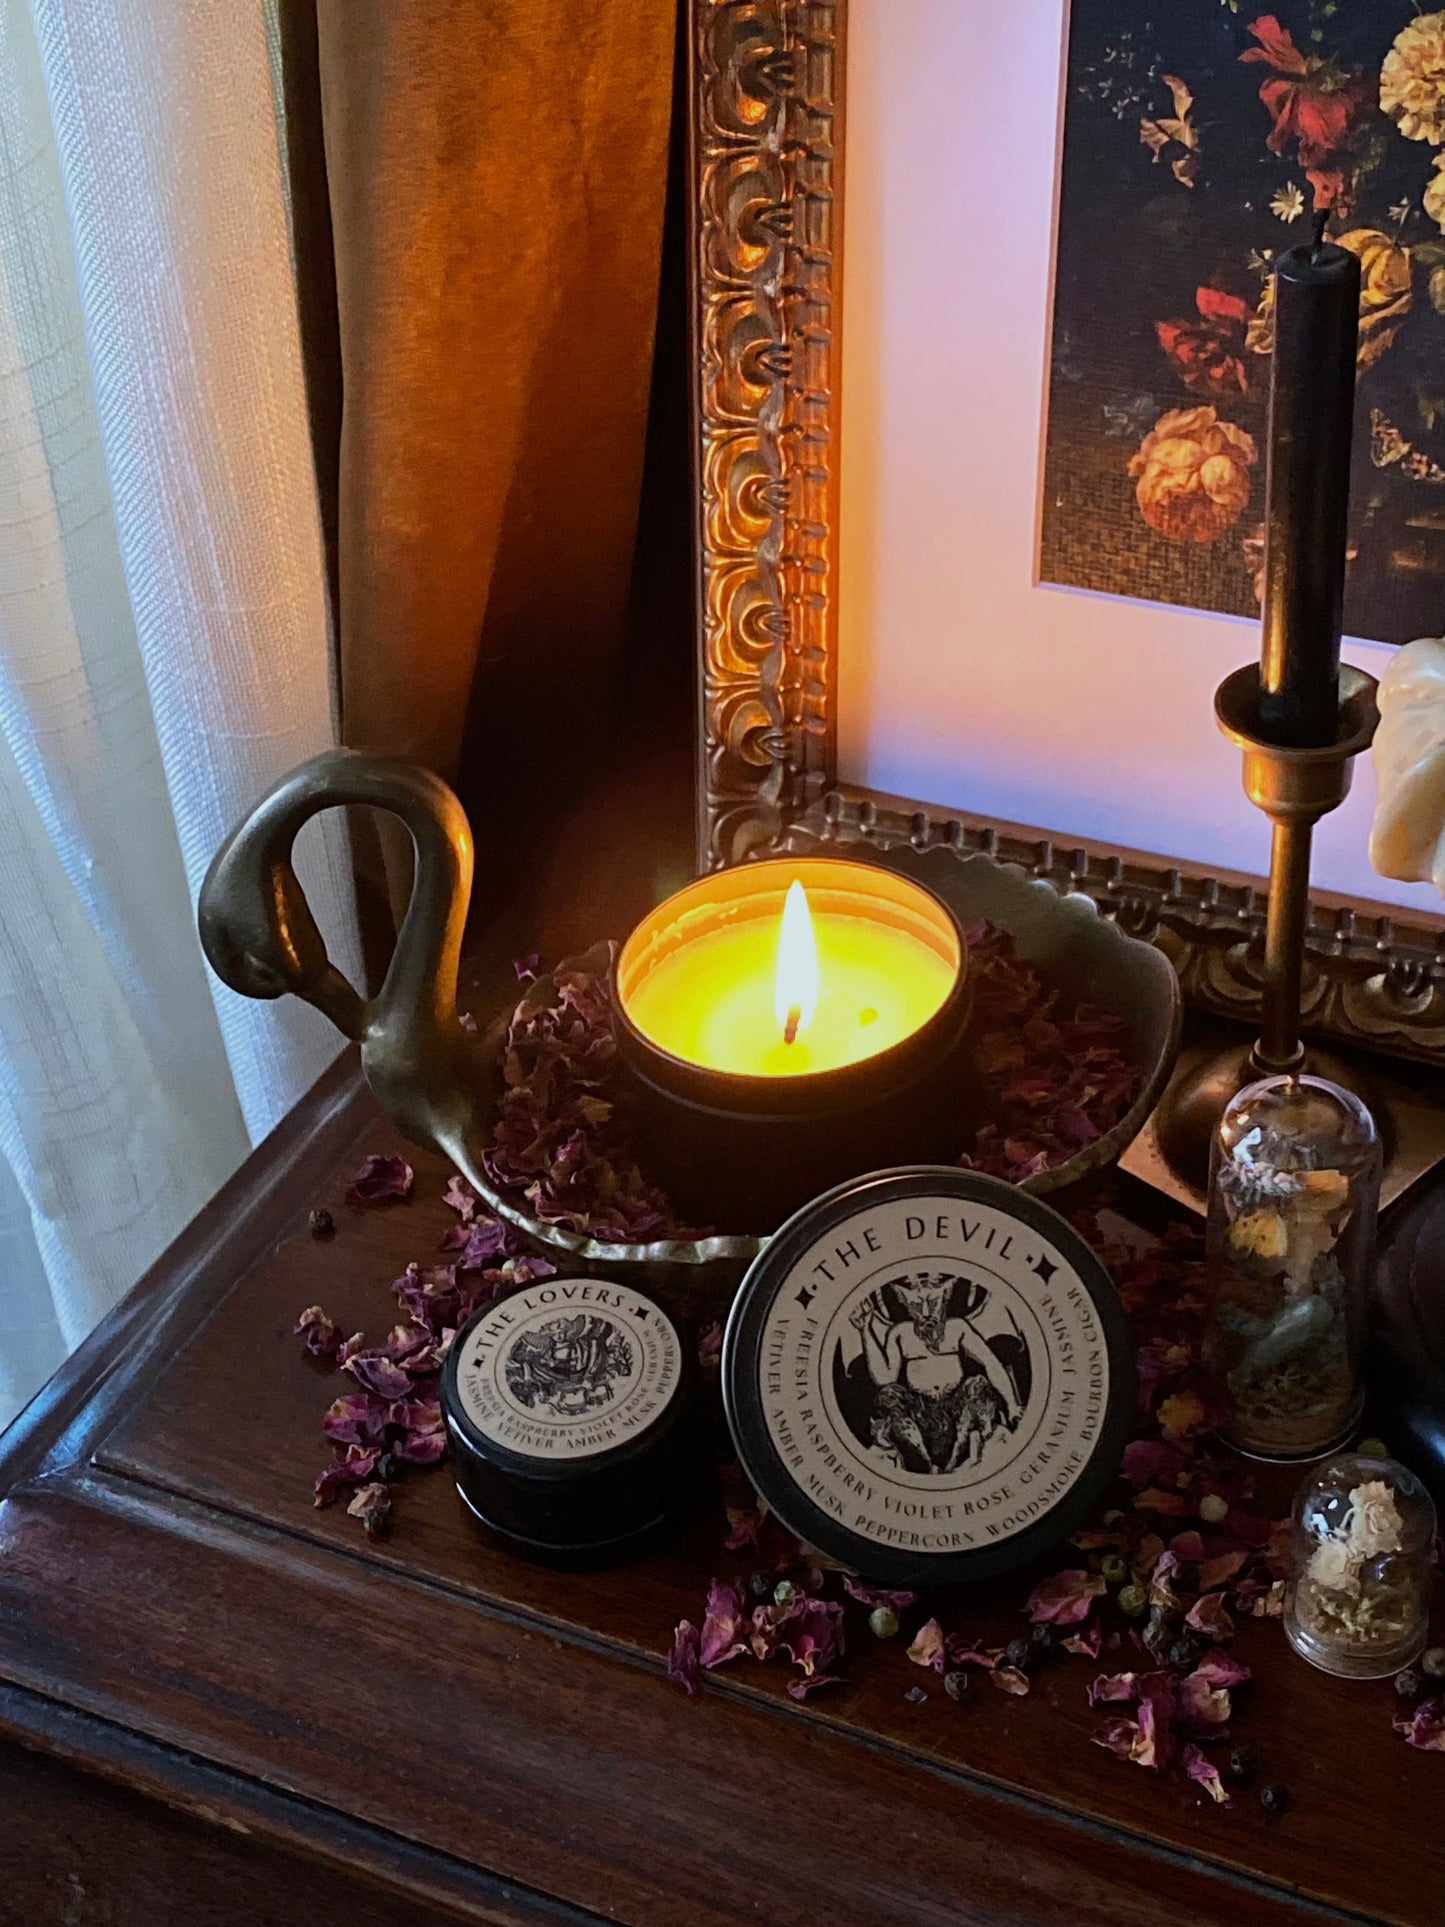 The Devil Tarot Soy Candle